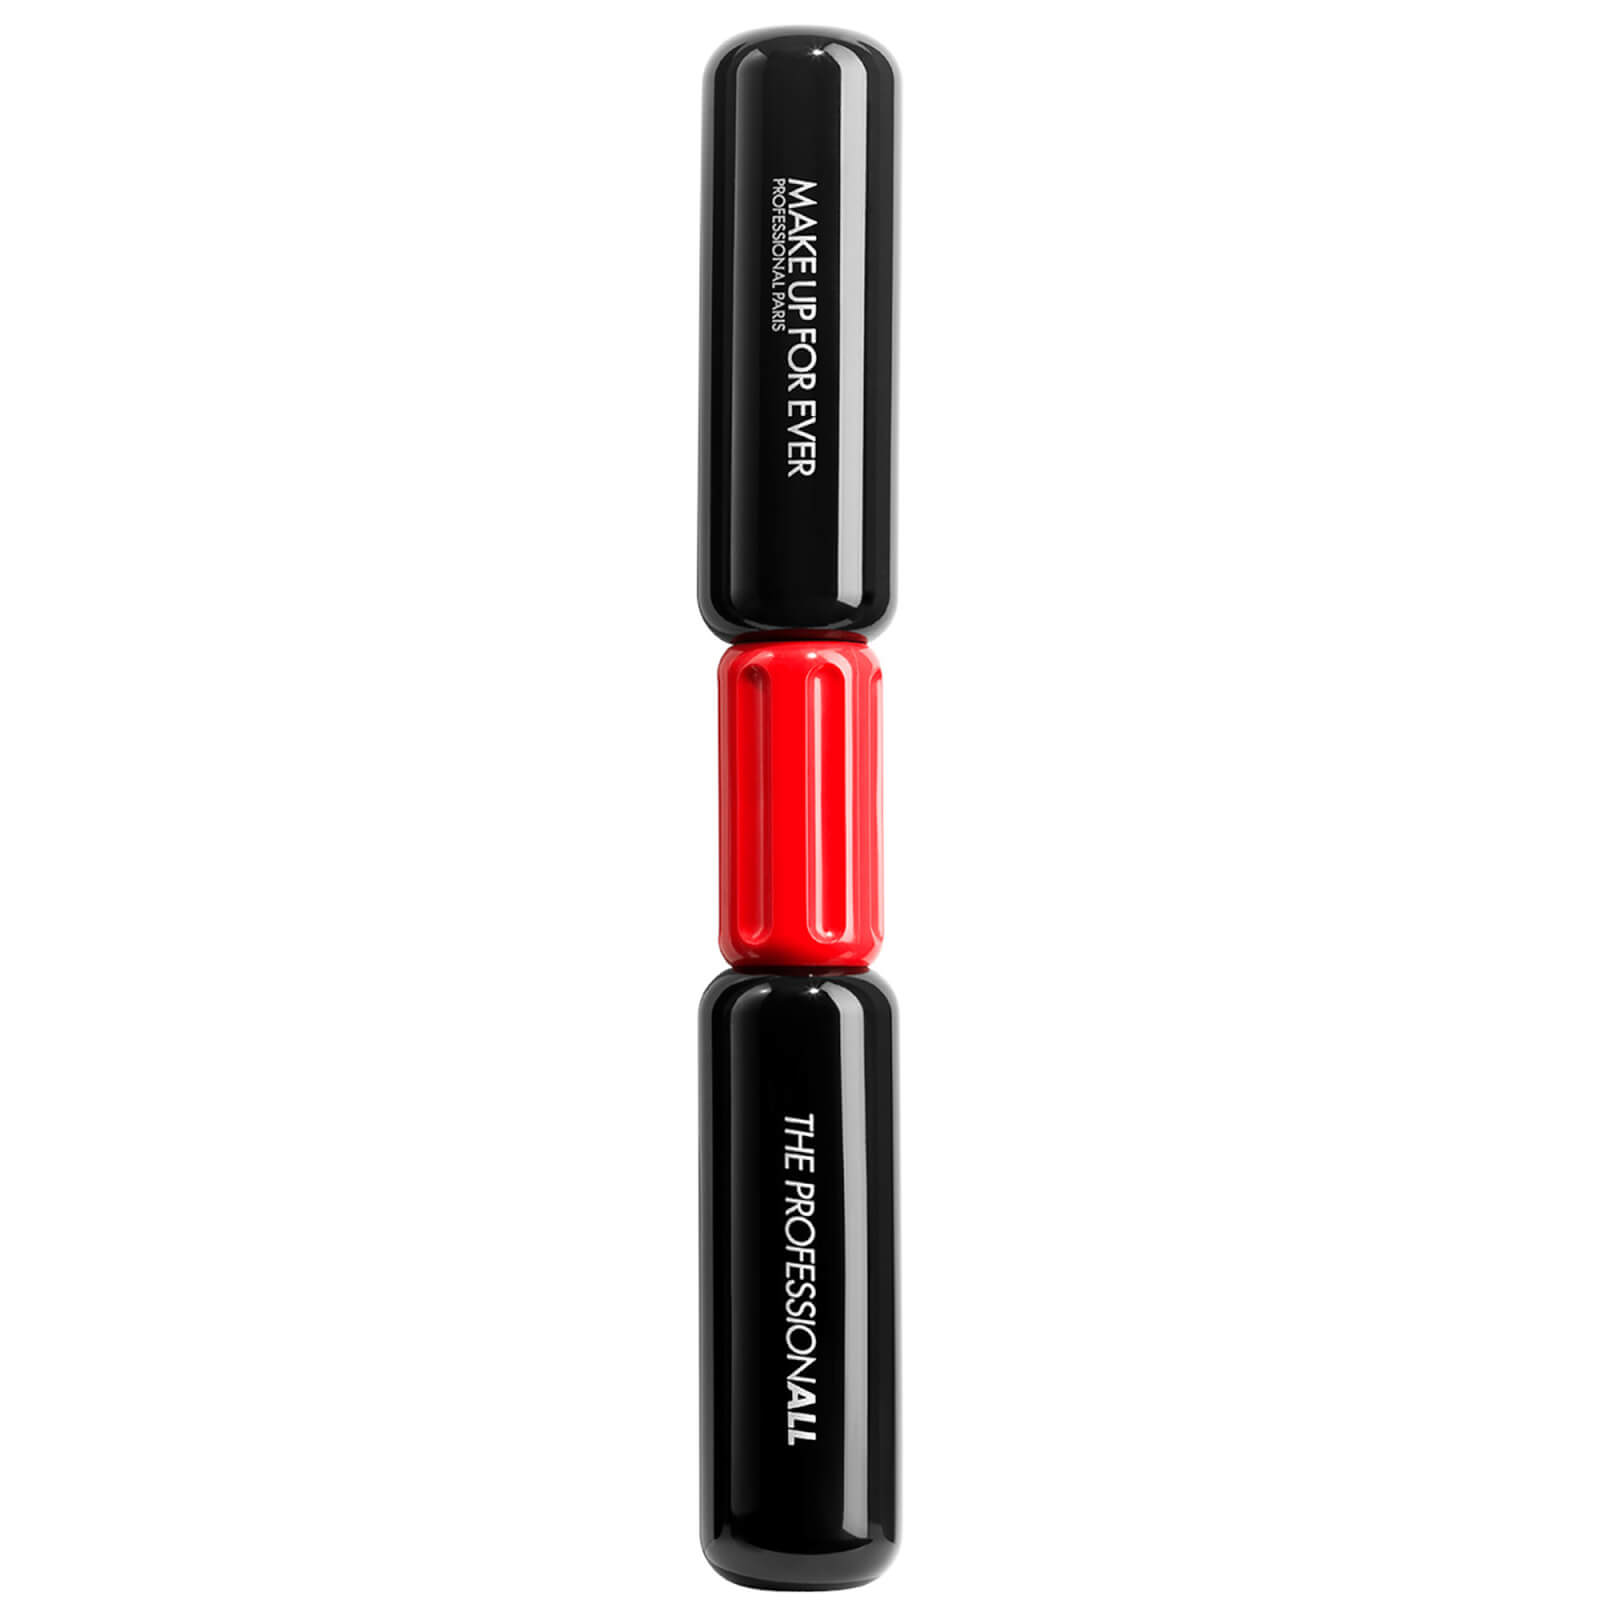 MAKE UP FOR EVER The Professionall Mascara-22 16ml